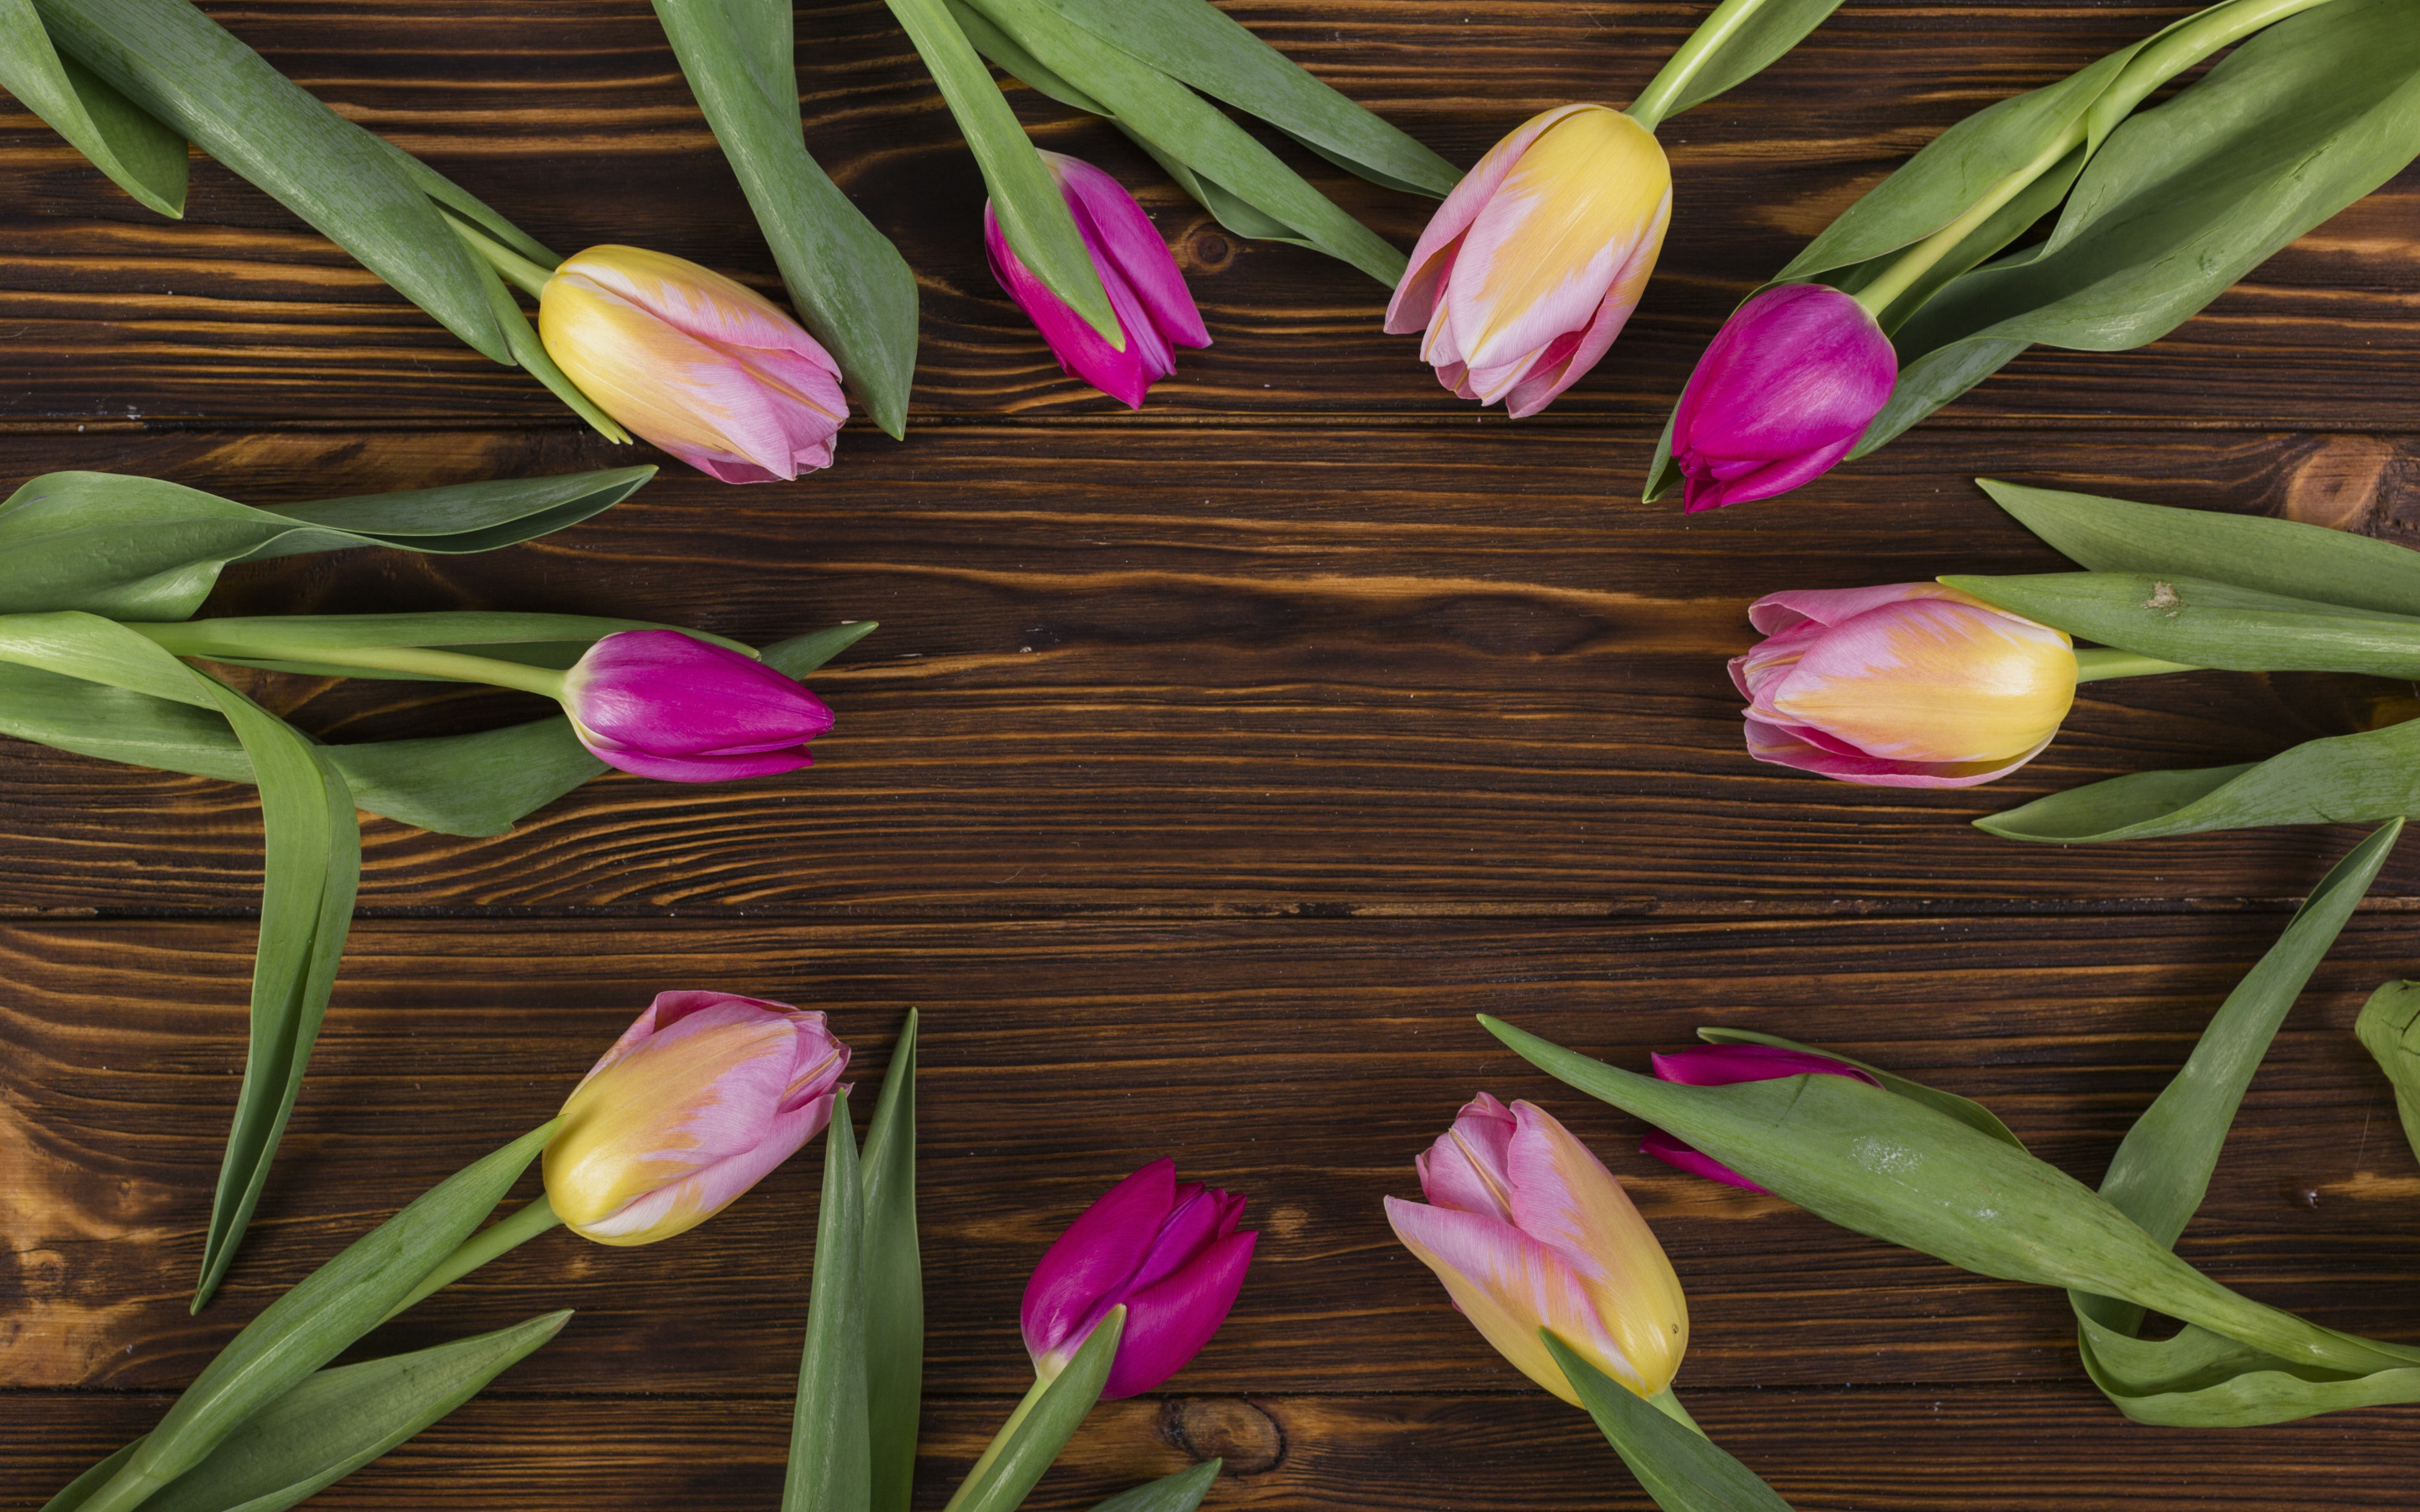 Download wallpaper frame with tulips, wooden brown background, spring flowers, tulips on wooden background, frame of flowers for desktop with resolution 2880x1800. High Quality HD picture wallpaper